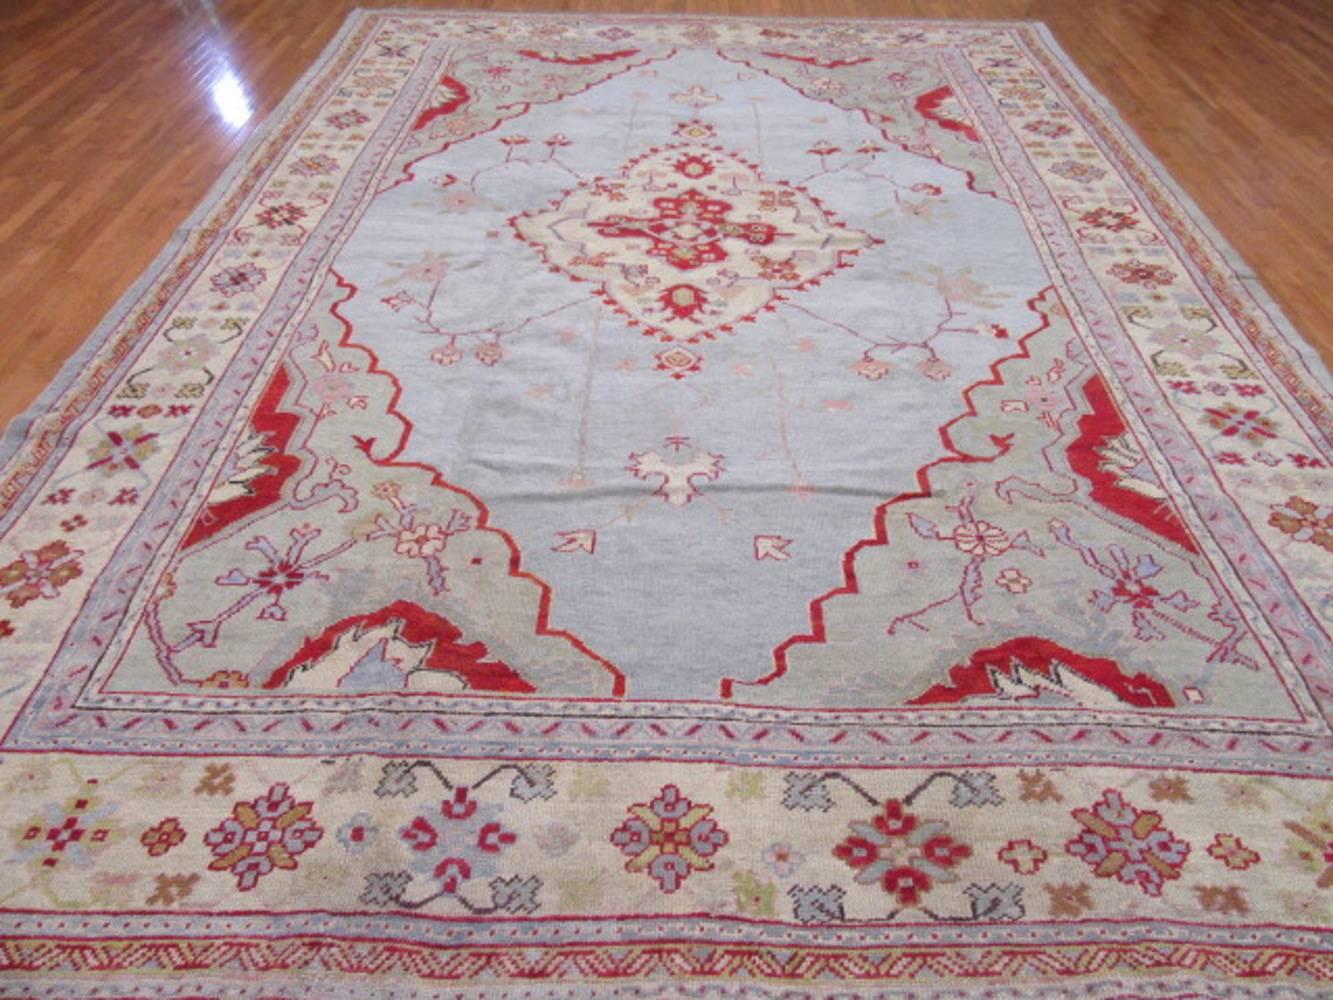 This early 20th century antique Turkish Oushak rug has an unusual and hard to find color combination. The rug is made with wool that is colored with natural dyes. A flexible rug that can work in just about any setting and any room. It measures 11'